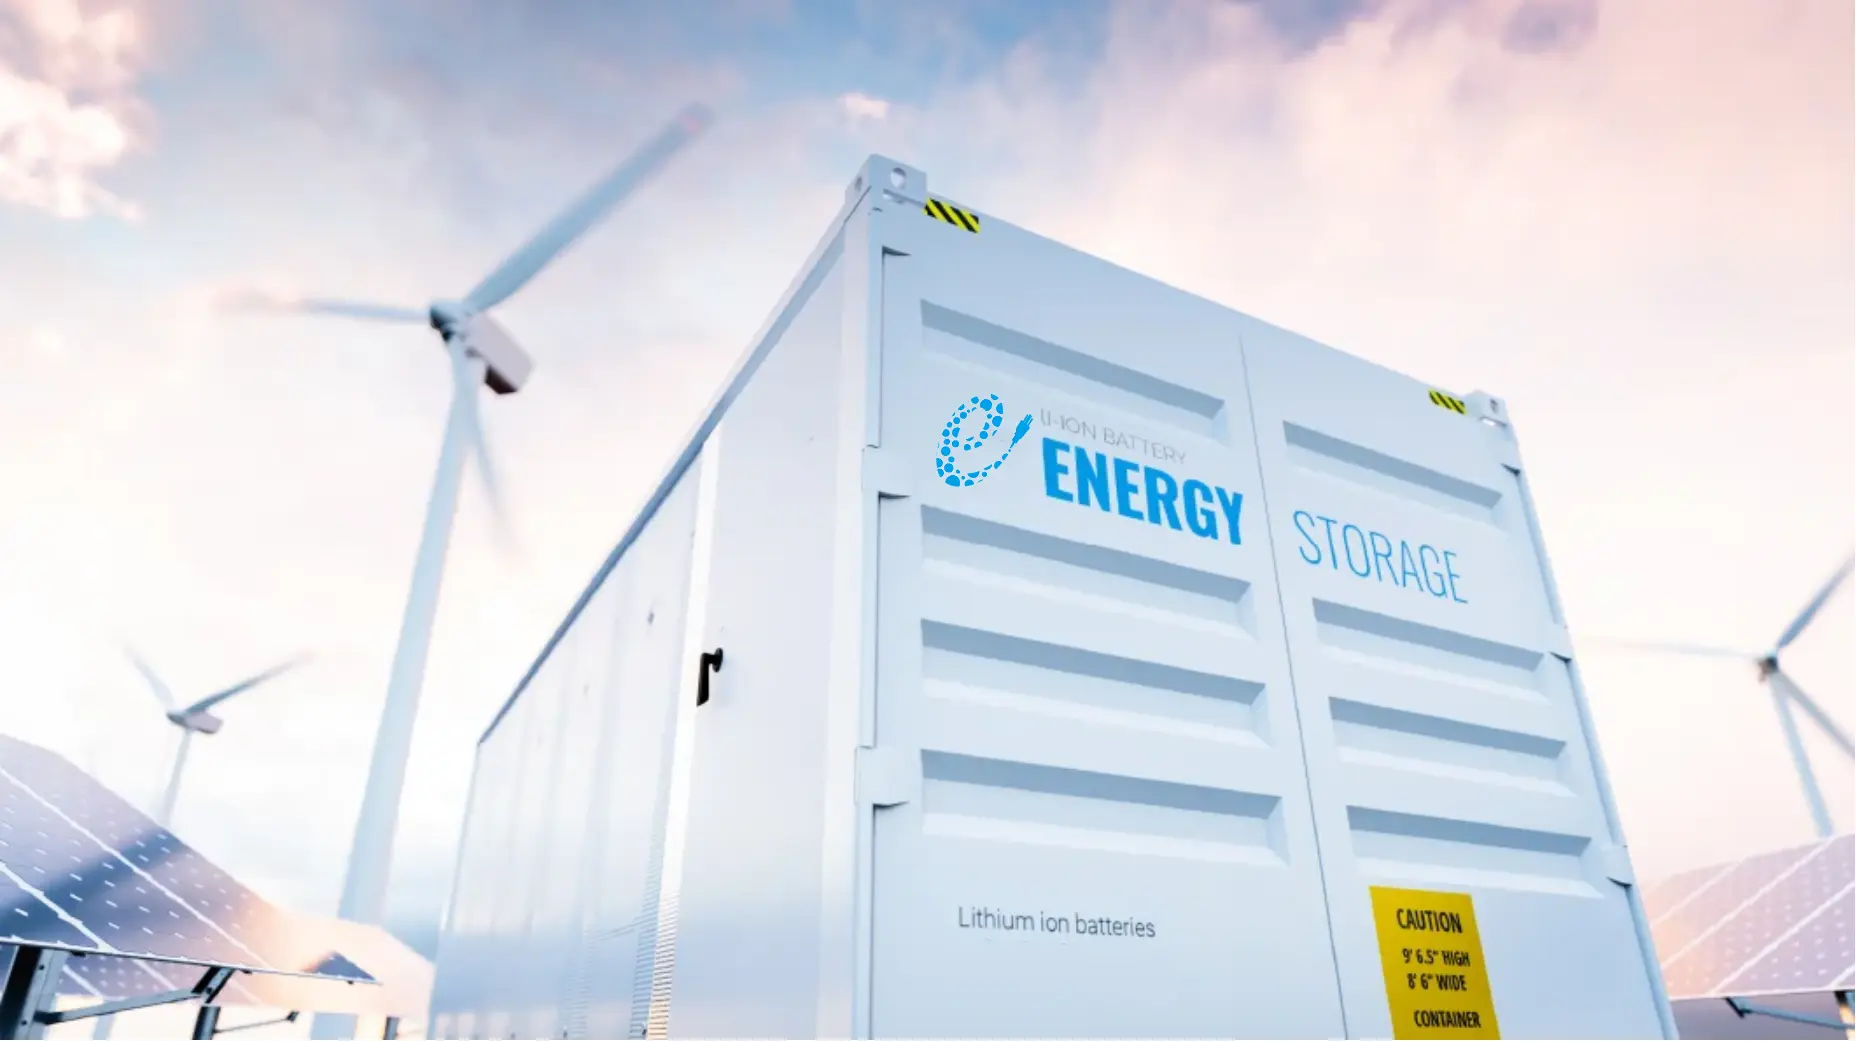 Overview of Energy Storage System